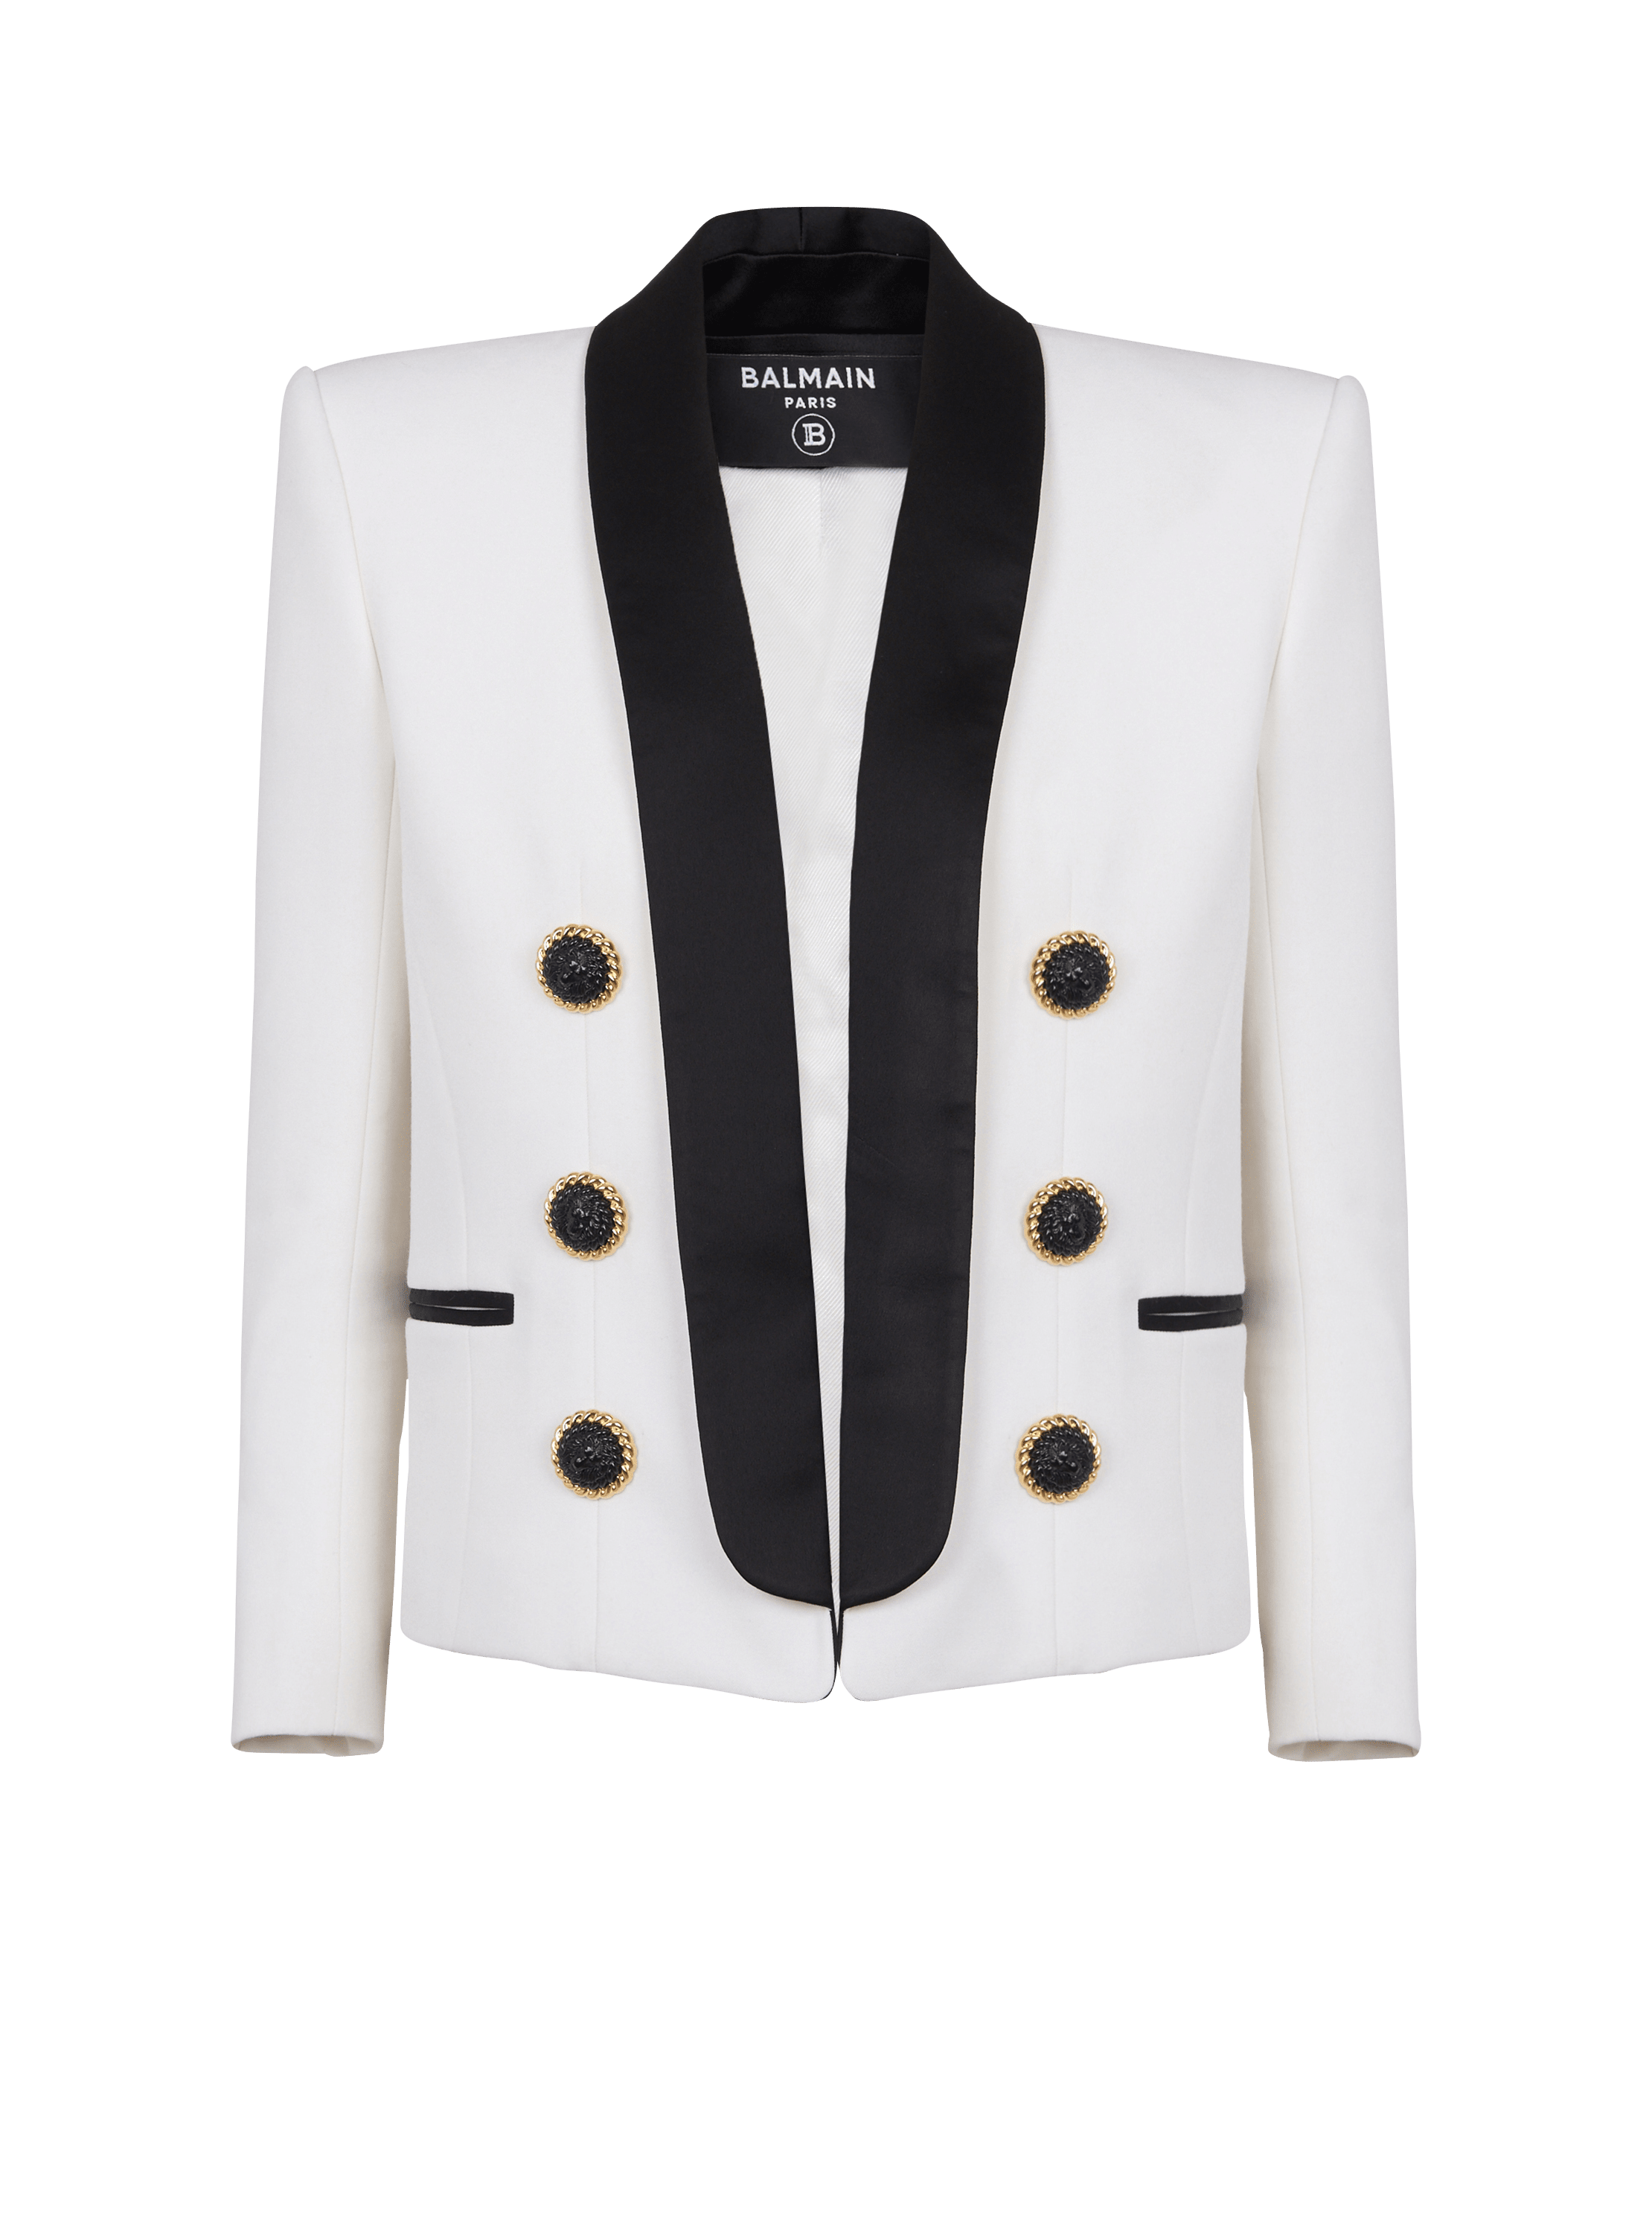 Two-tone edge-to-edge jacket with 6 buttons